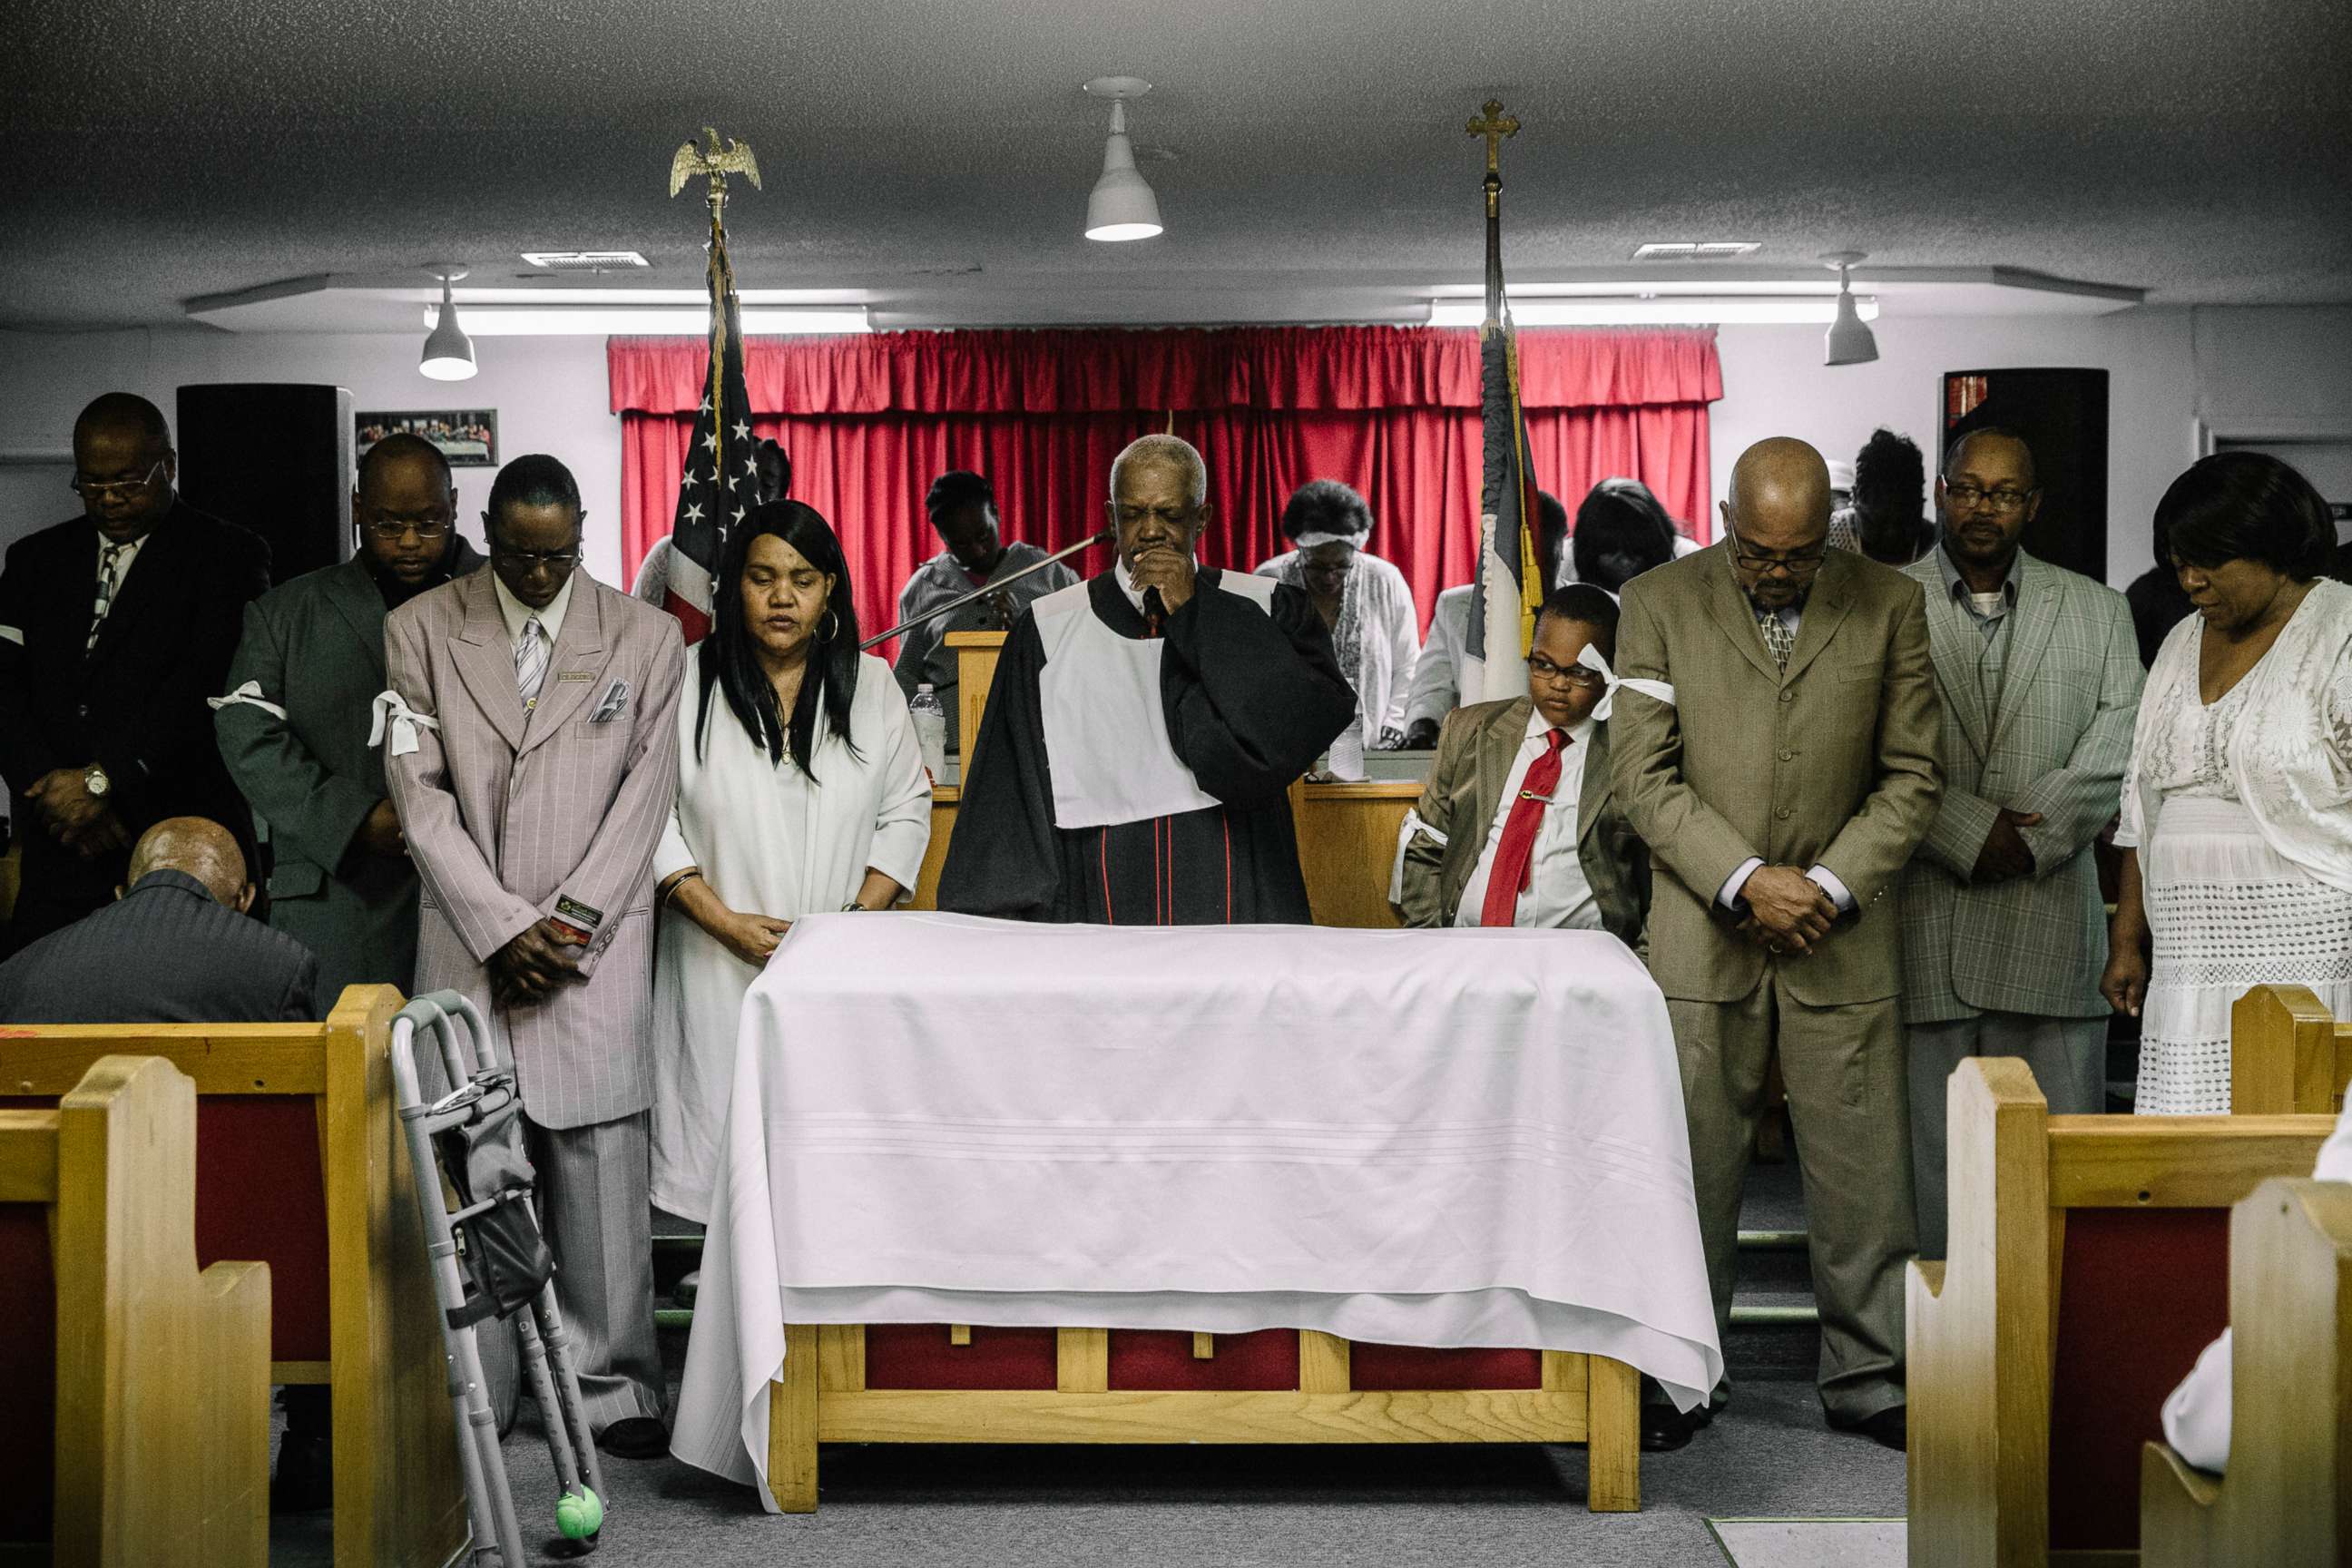 PHOTO: The Rev. Gerald Toussaint leads a service at Morning Star Baptist Church, in Opelousas, La., April 7, 2019.